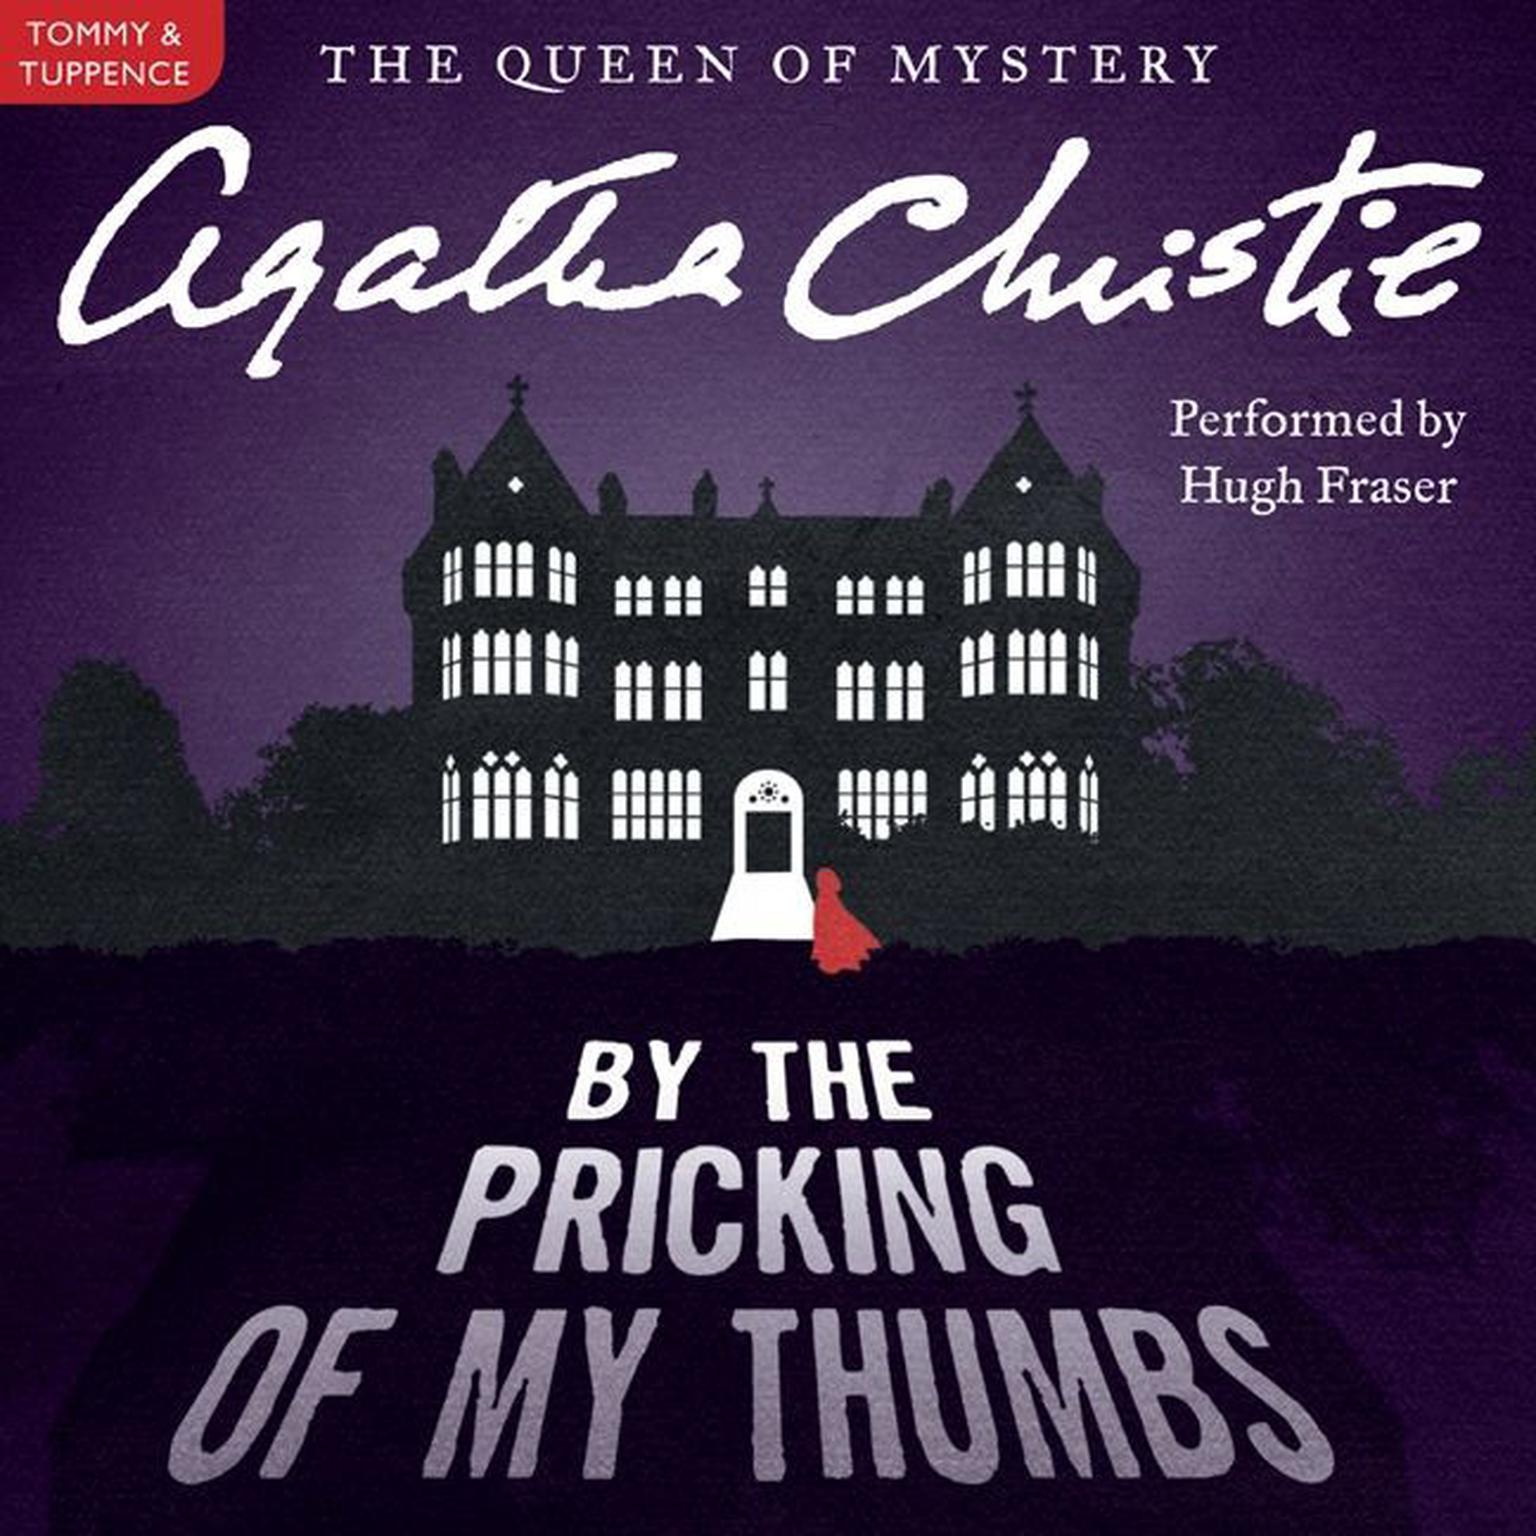 By the Pricking of My Thumbs: A Tommy and Tuppence Mystery: The Official Authorized Edition Audiobook, by Agatha Christie